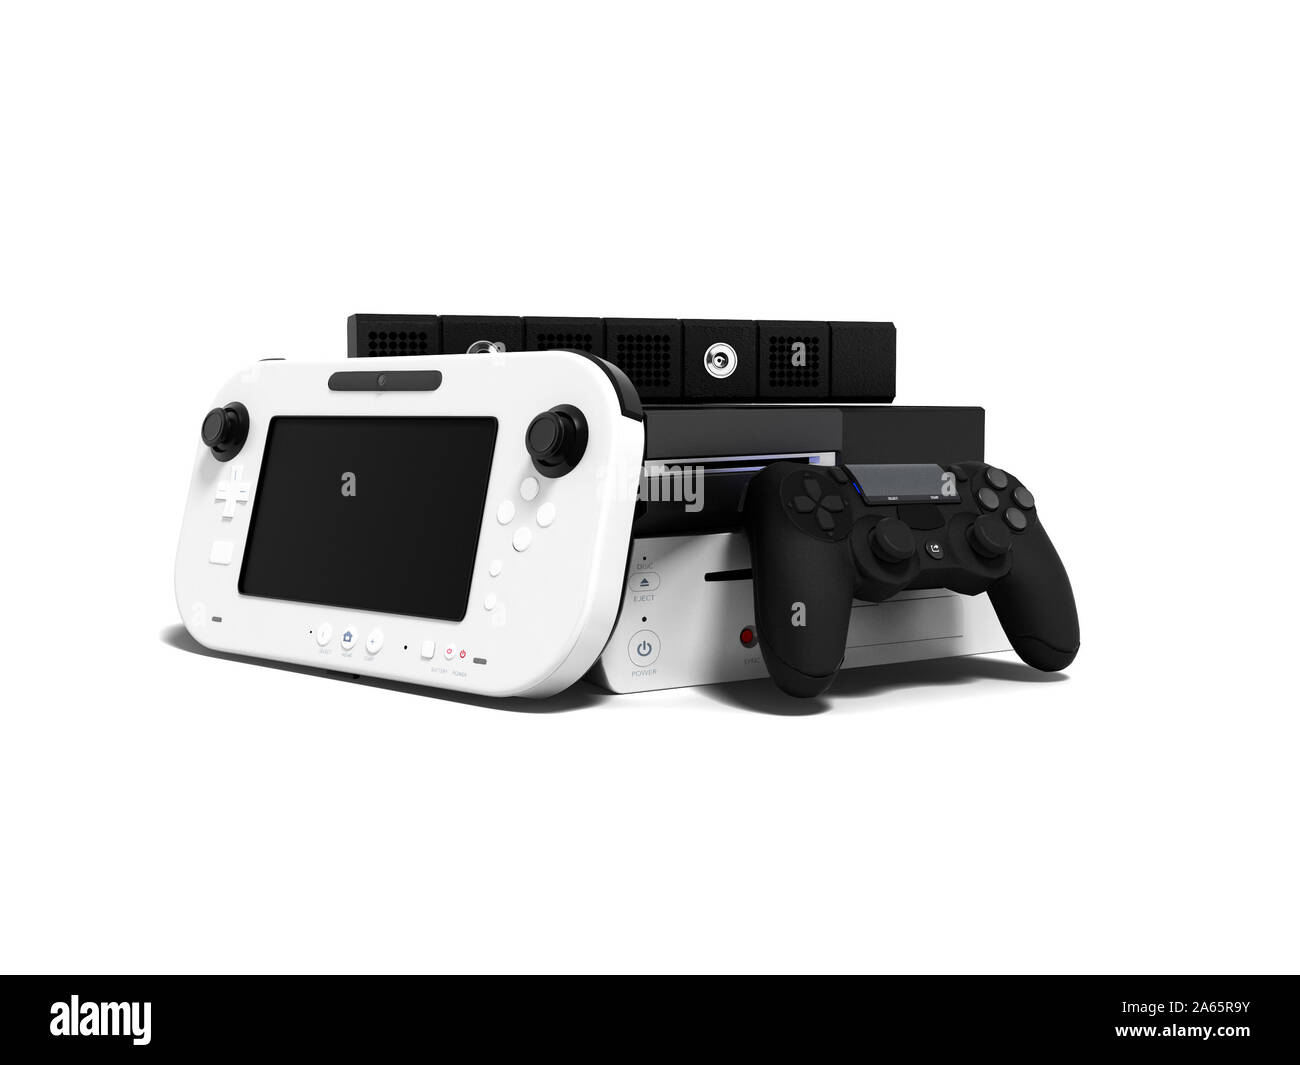 Concept of gaming consoles for games at home or on the street 3d render on white background with shadow Stock Photo